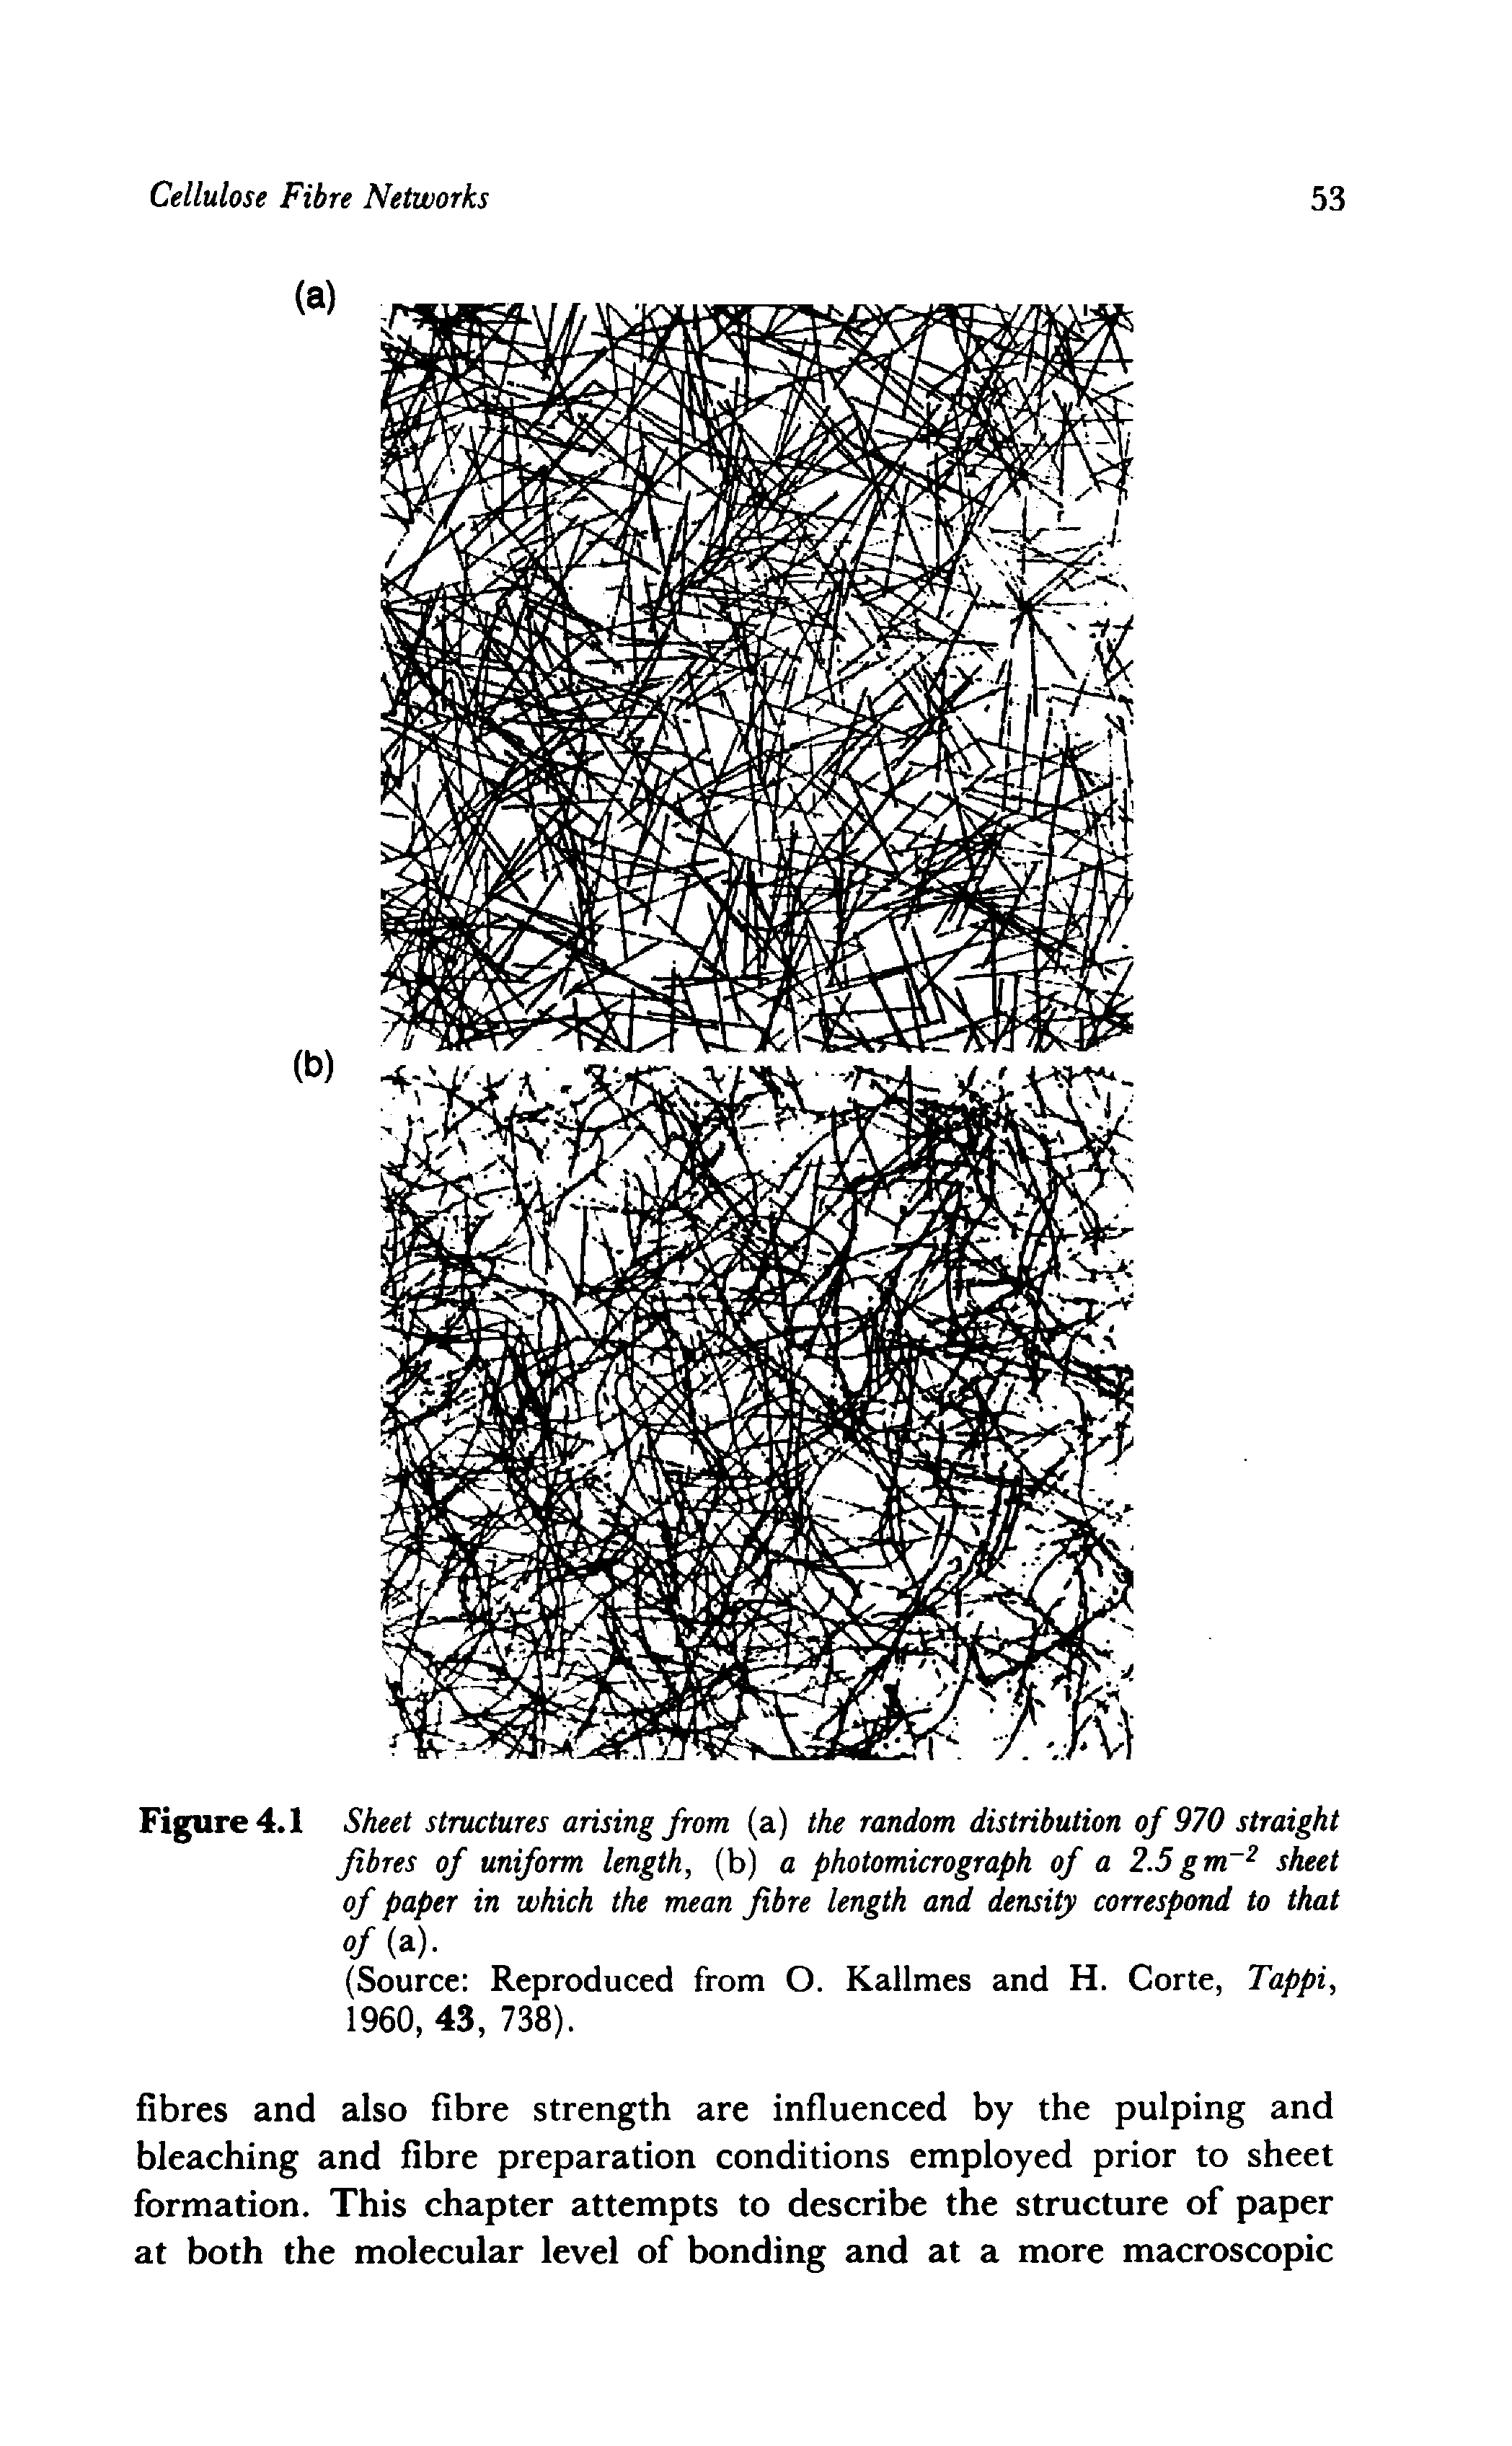 Figure 4.1 Sheet structures arising from (a) the random distribution of 970 straight fibres of uniform length, (b) a photomicrograph of a 2.5gmr2 sheet of paper in which the mean fibre length and density correspond to that...